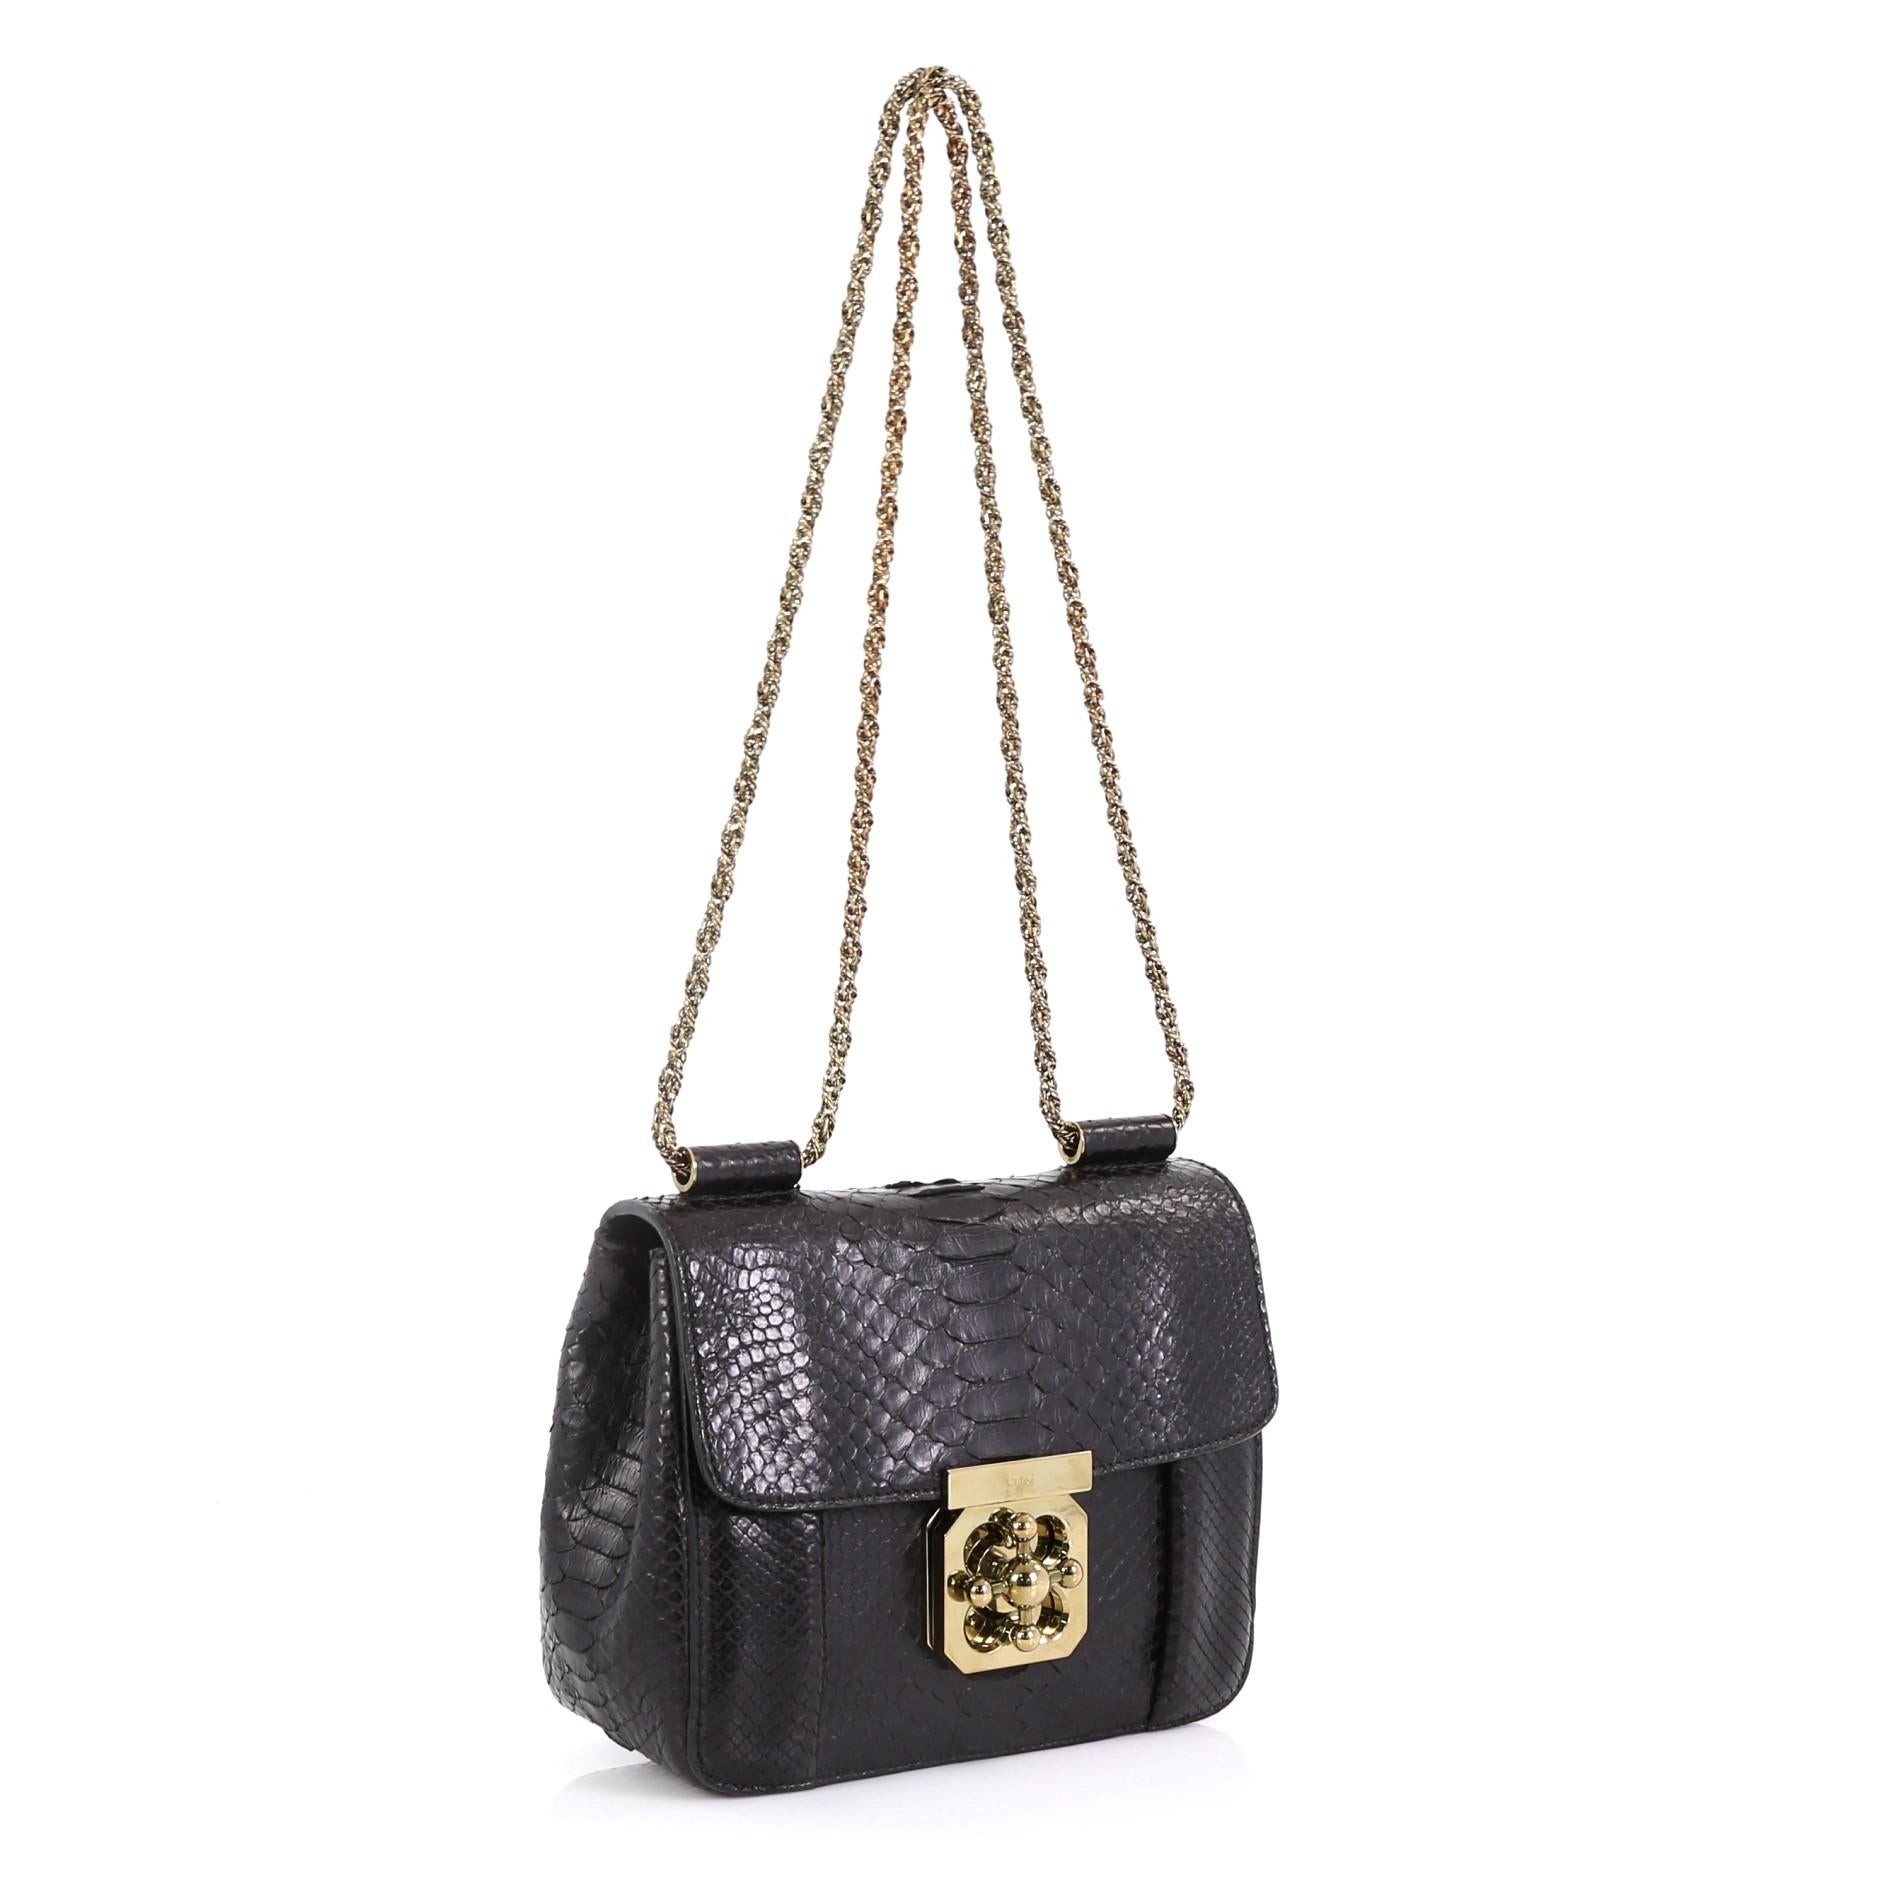 This Chloe Elsie Chain Shoulder Bag Python Small, crafted from genuine black python, features chain link strap and gold-tone hardware. Its floral turn-lock closure opens to a black leather interior with slip pocket. This item can only be shipped